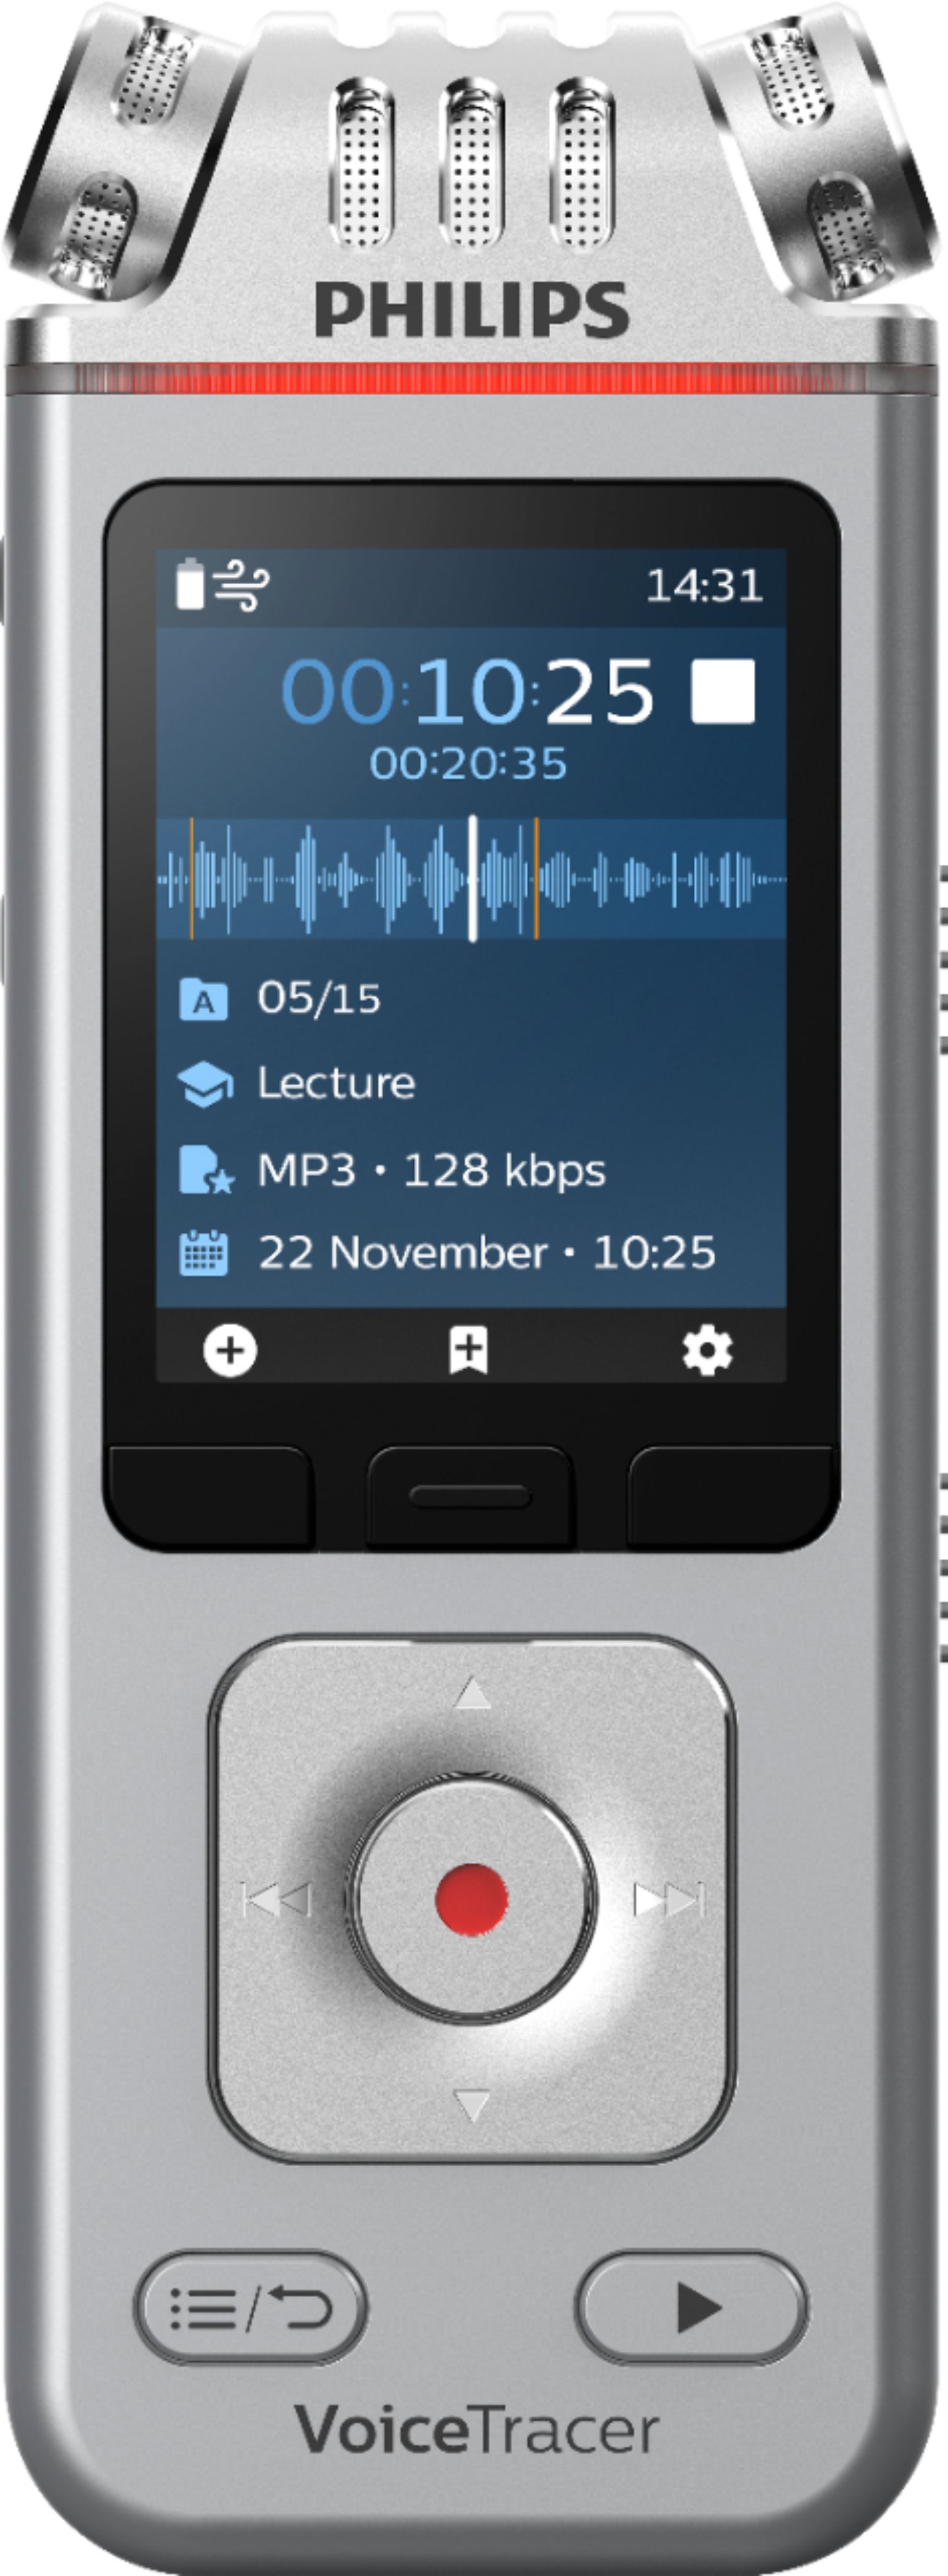 Philips - VoiceTracer Audio Recorder - Silver/Chrome